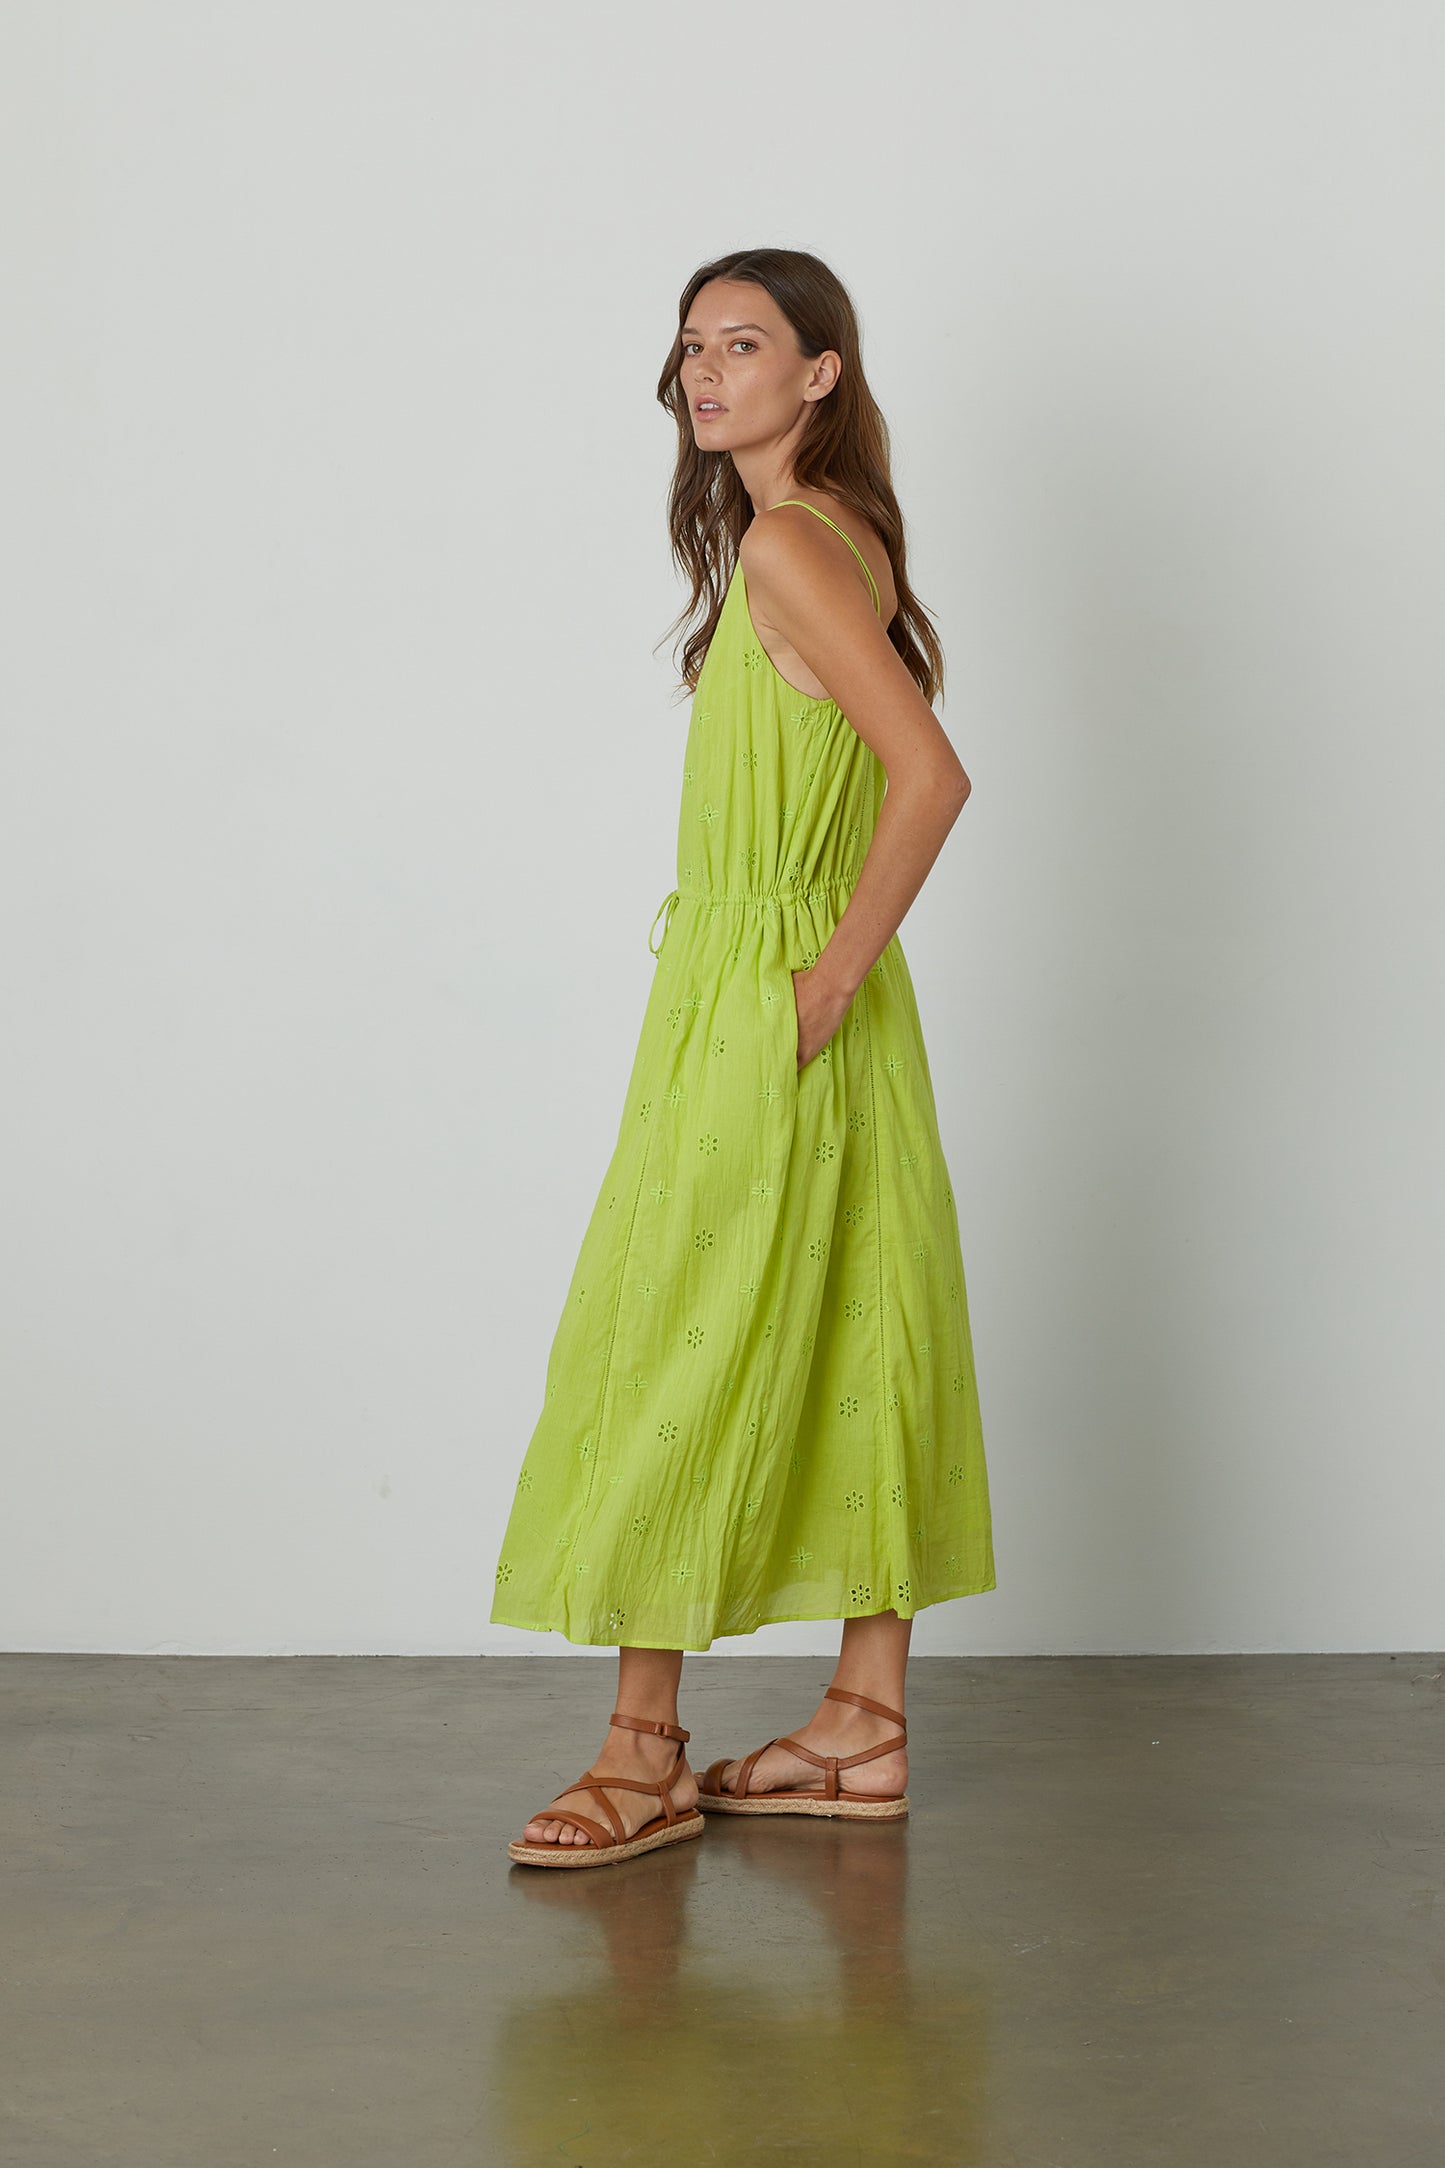 MADELYN COTTON EYELET TANK DRESS IN LIME